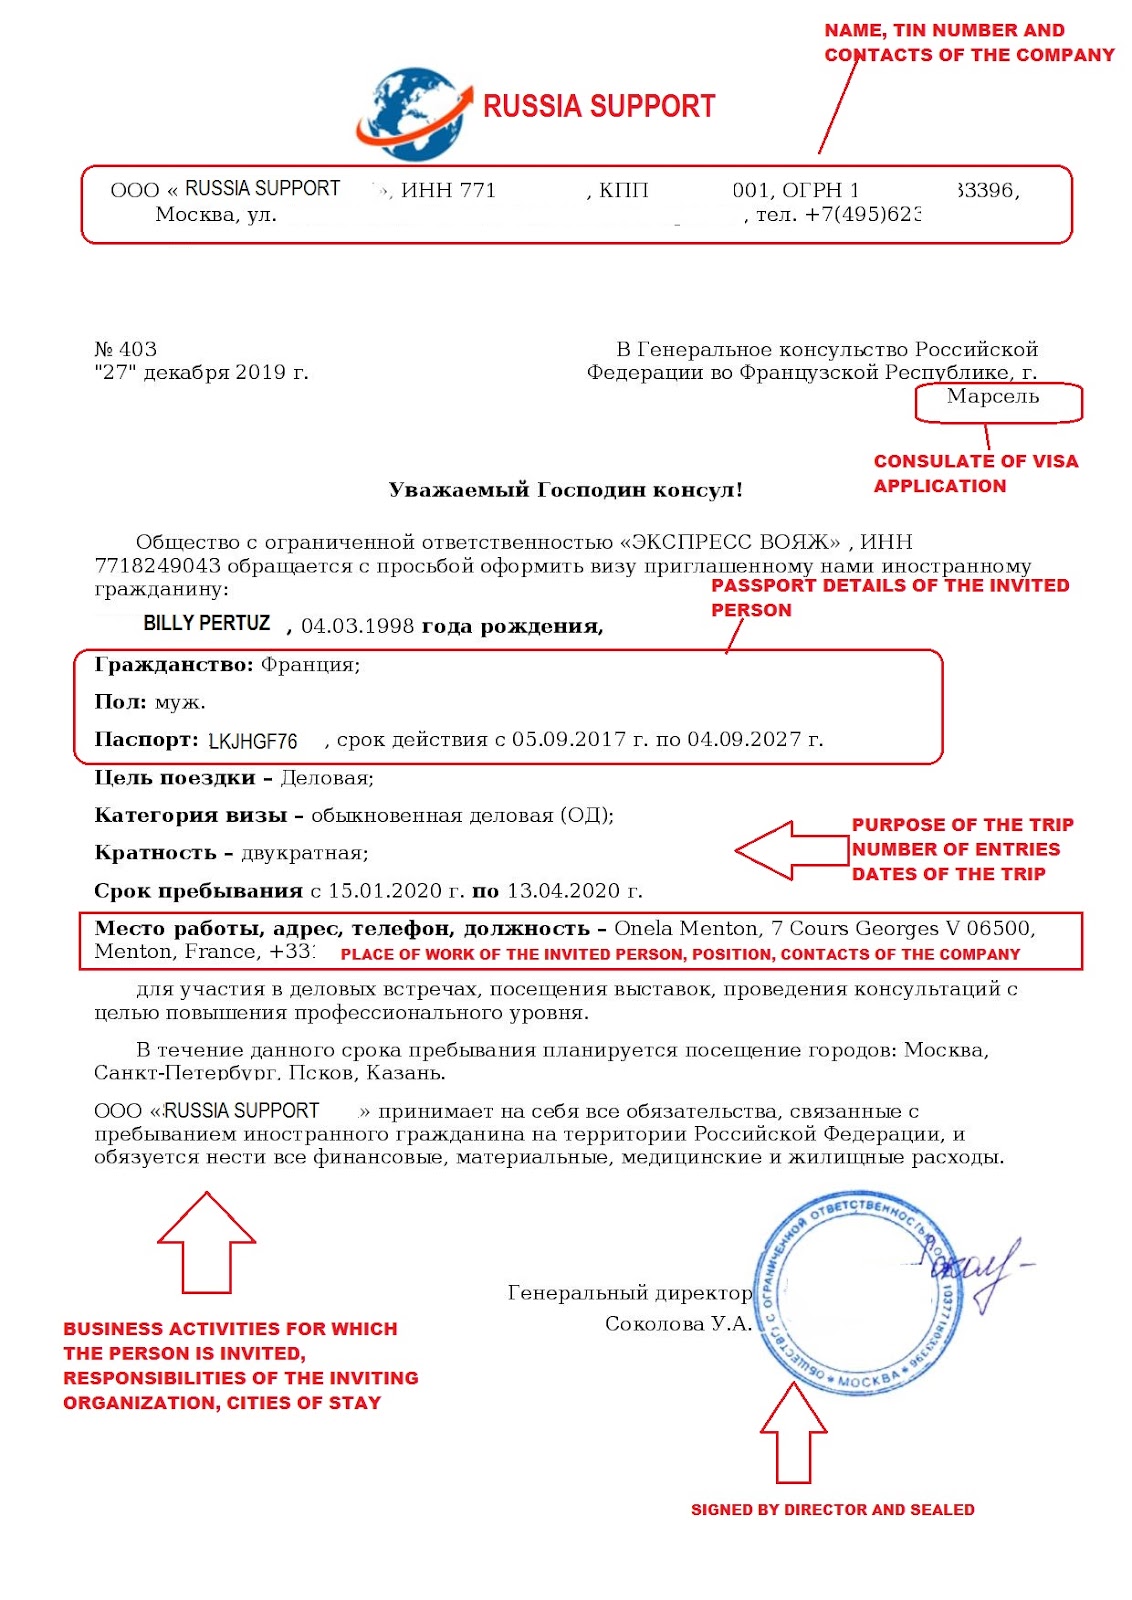 How to get a Russian Visa Invitation (New Guide 2020) - Russia.Support